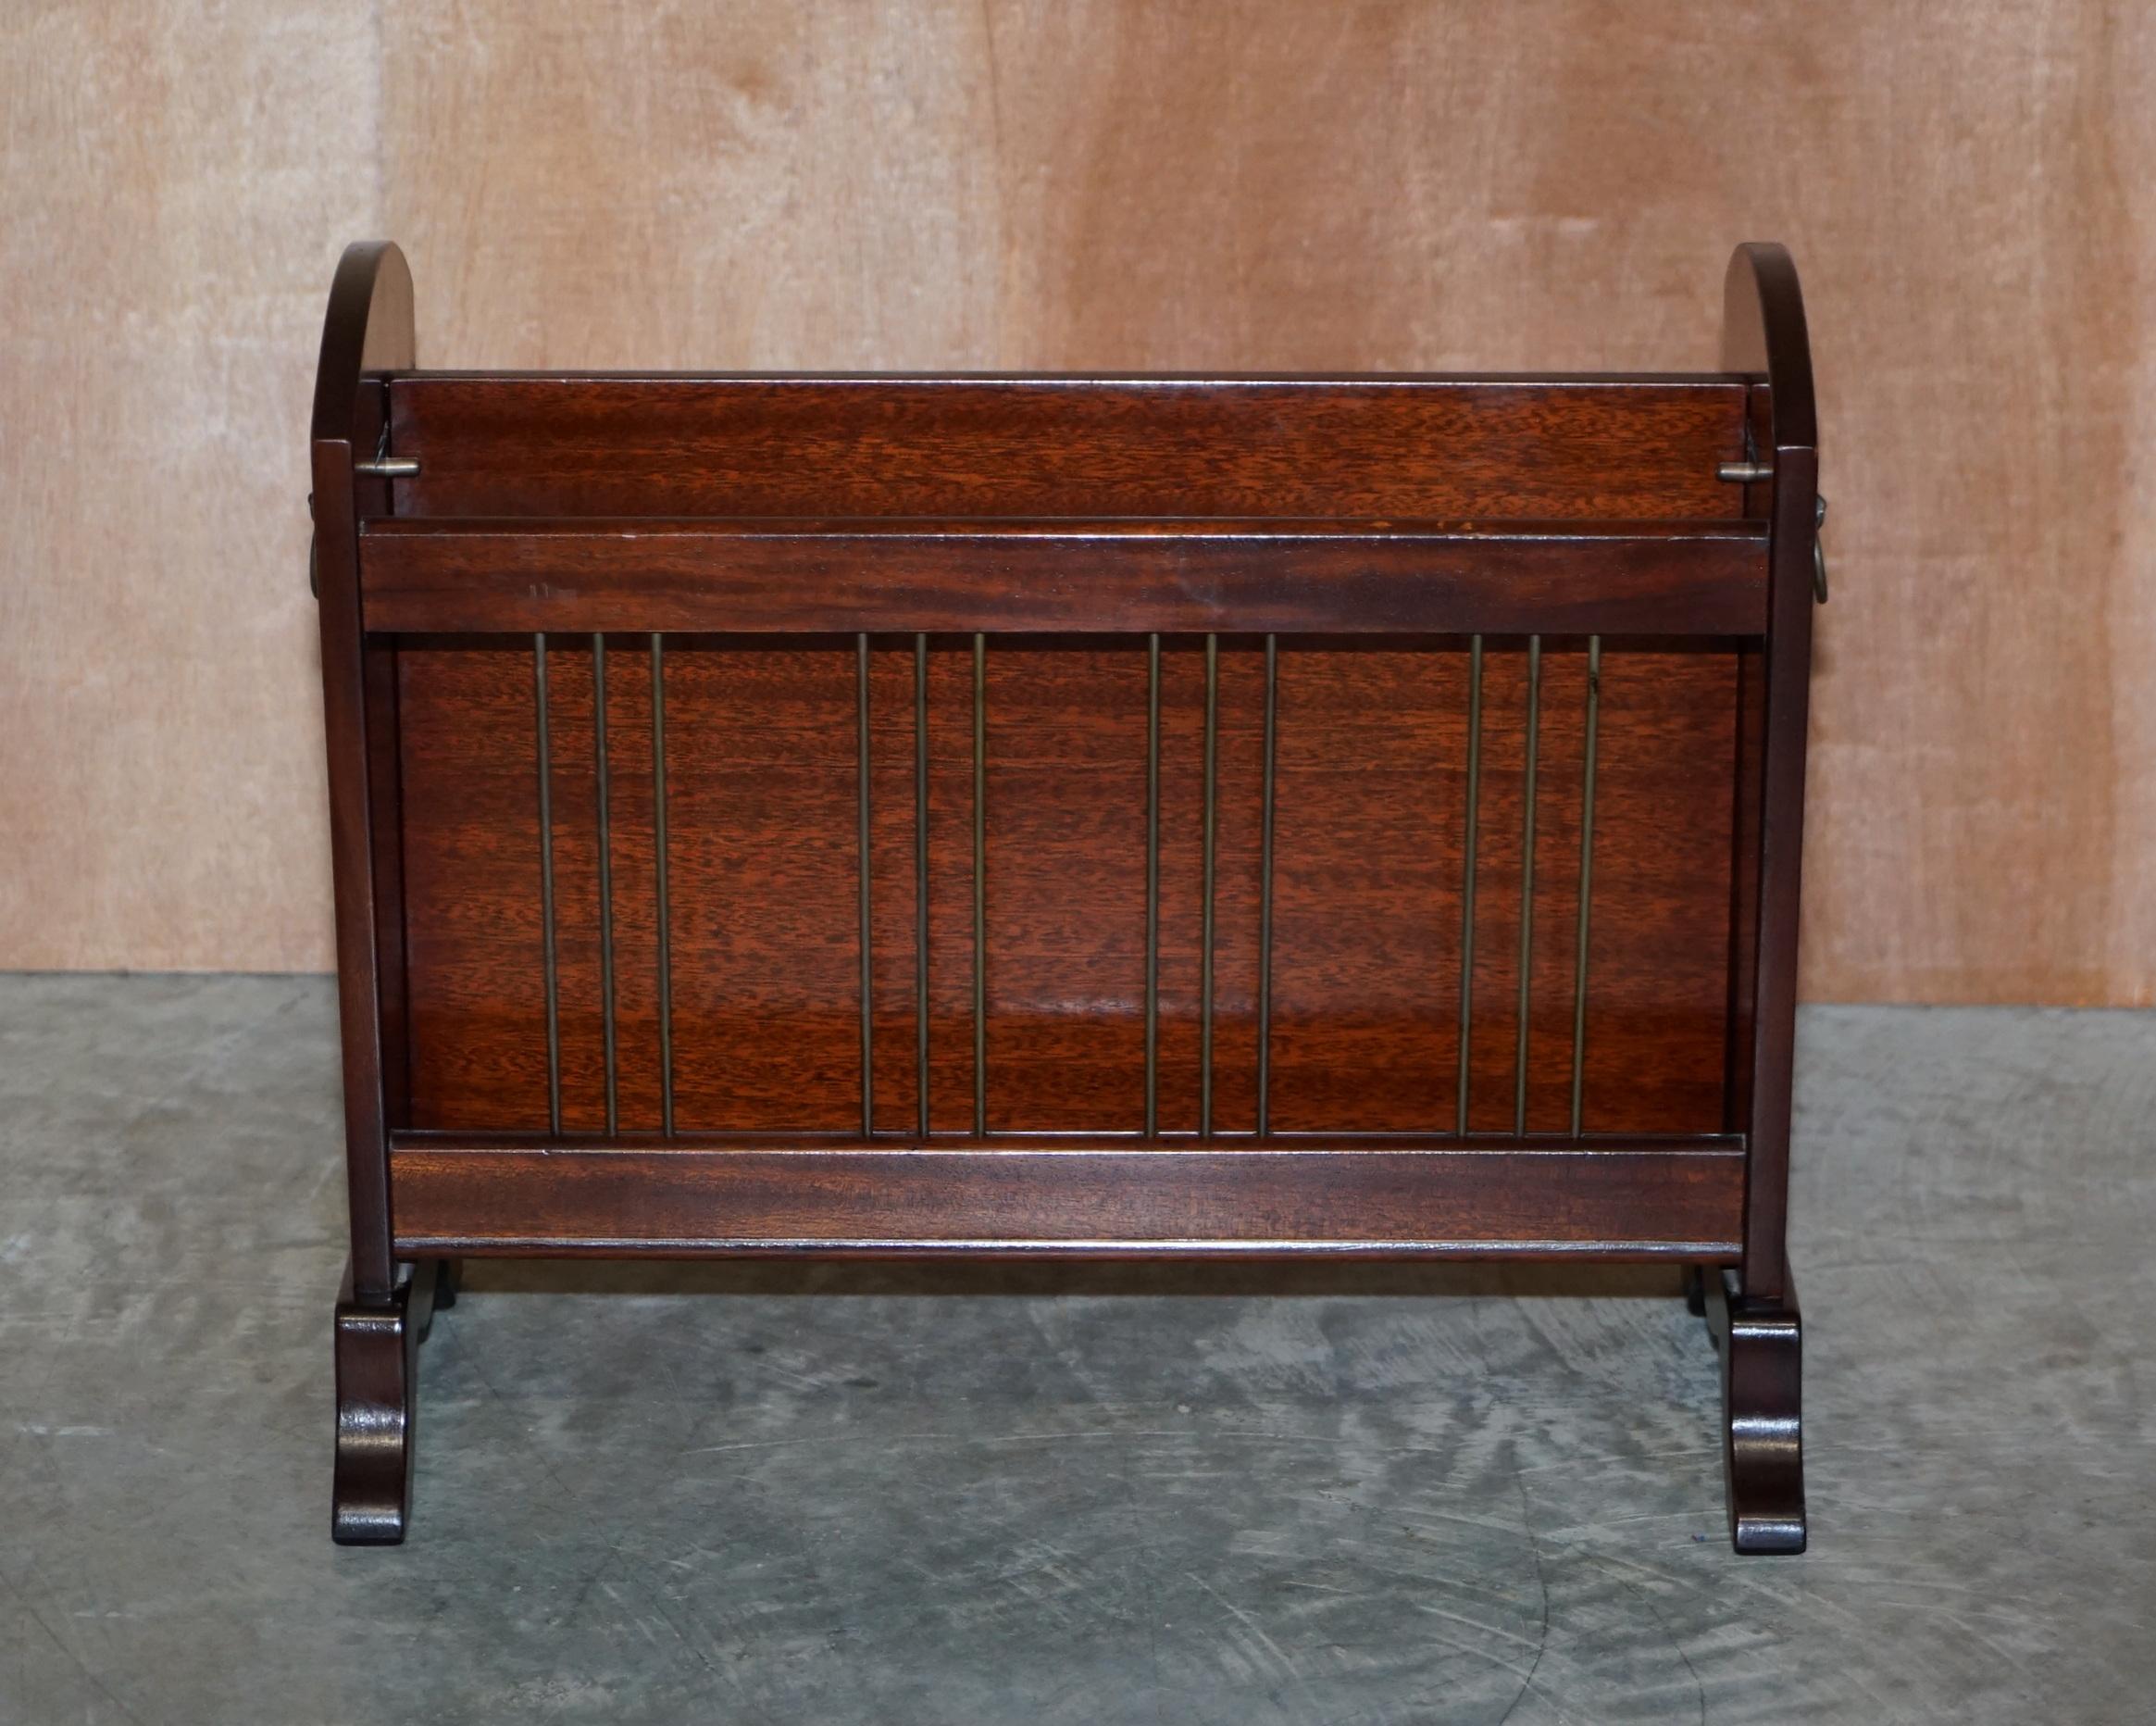 We are delighted to offer this lovely circa 1950-1960 Bevan Funnell mahogany magazine newspaper rack with Lion’s head handles

A good looking, decorative and well made piece. The hands depict Lion’s mains which are very decorative, the middle